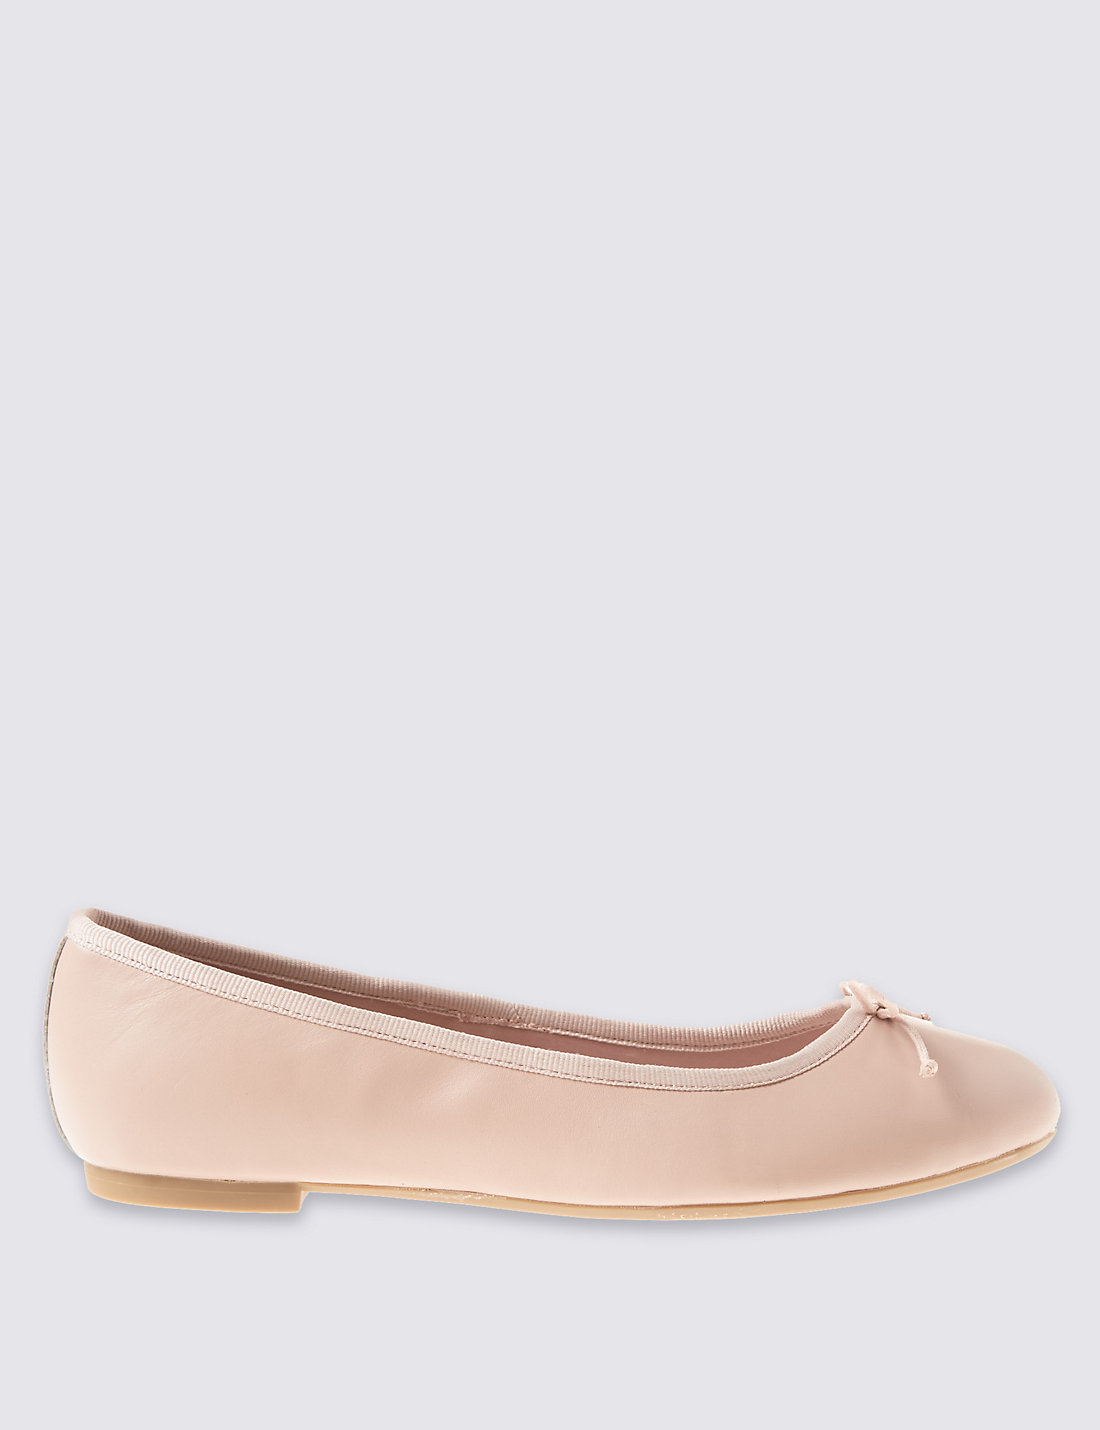 Ballerian pumps- a stylish and comfortable footwear